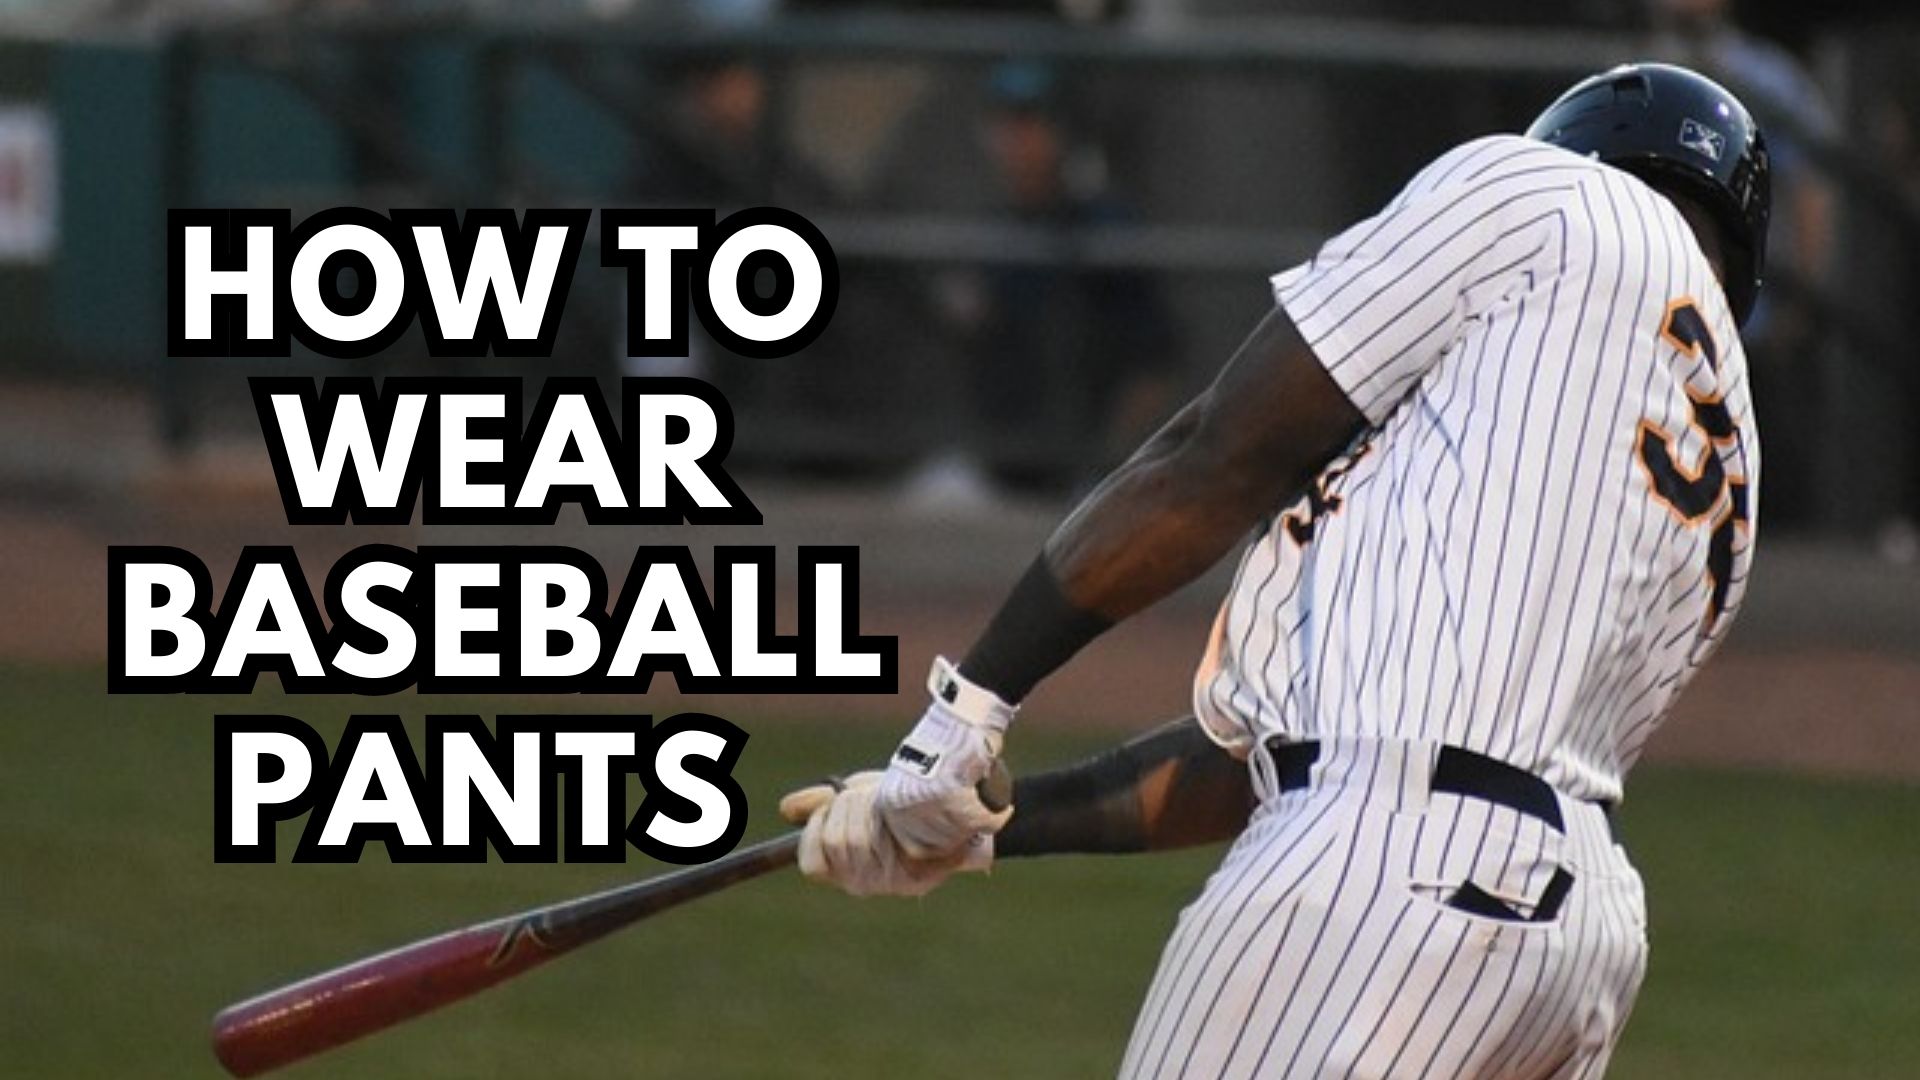 How to wear baseball pants and knickers with socks